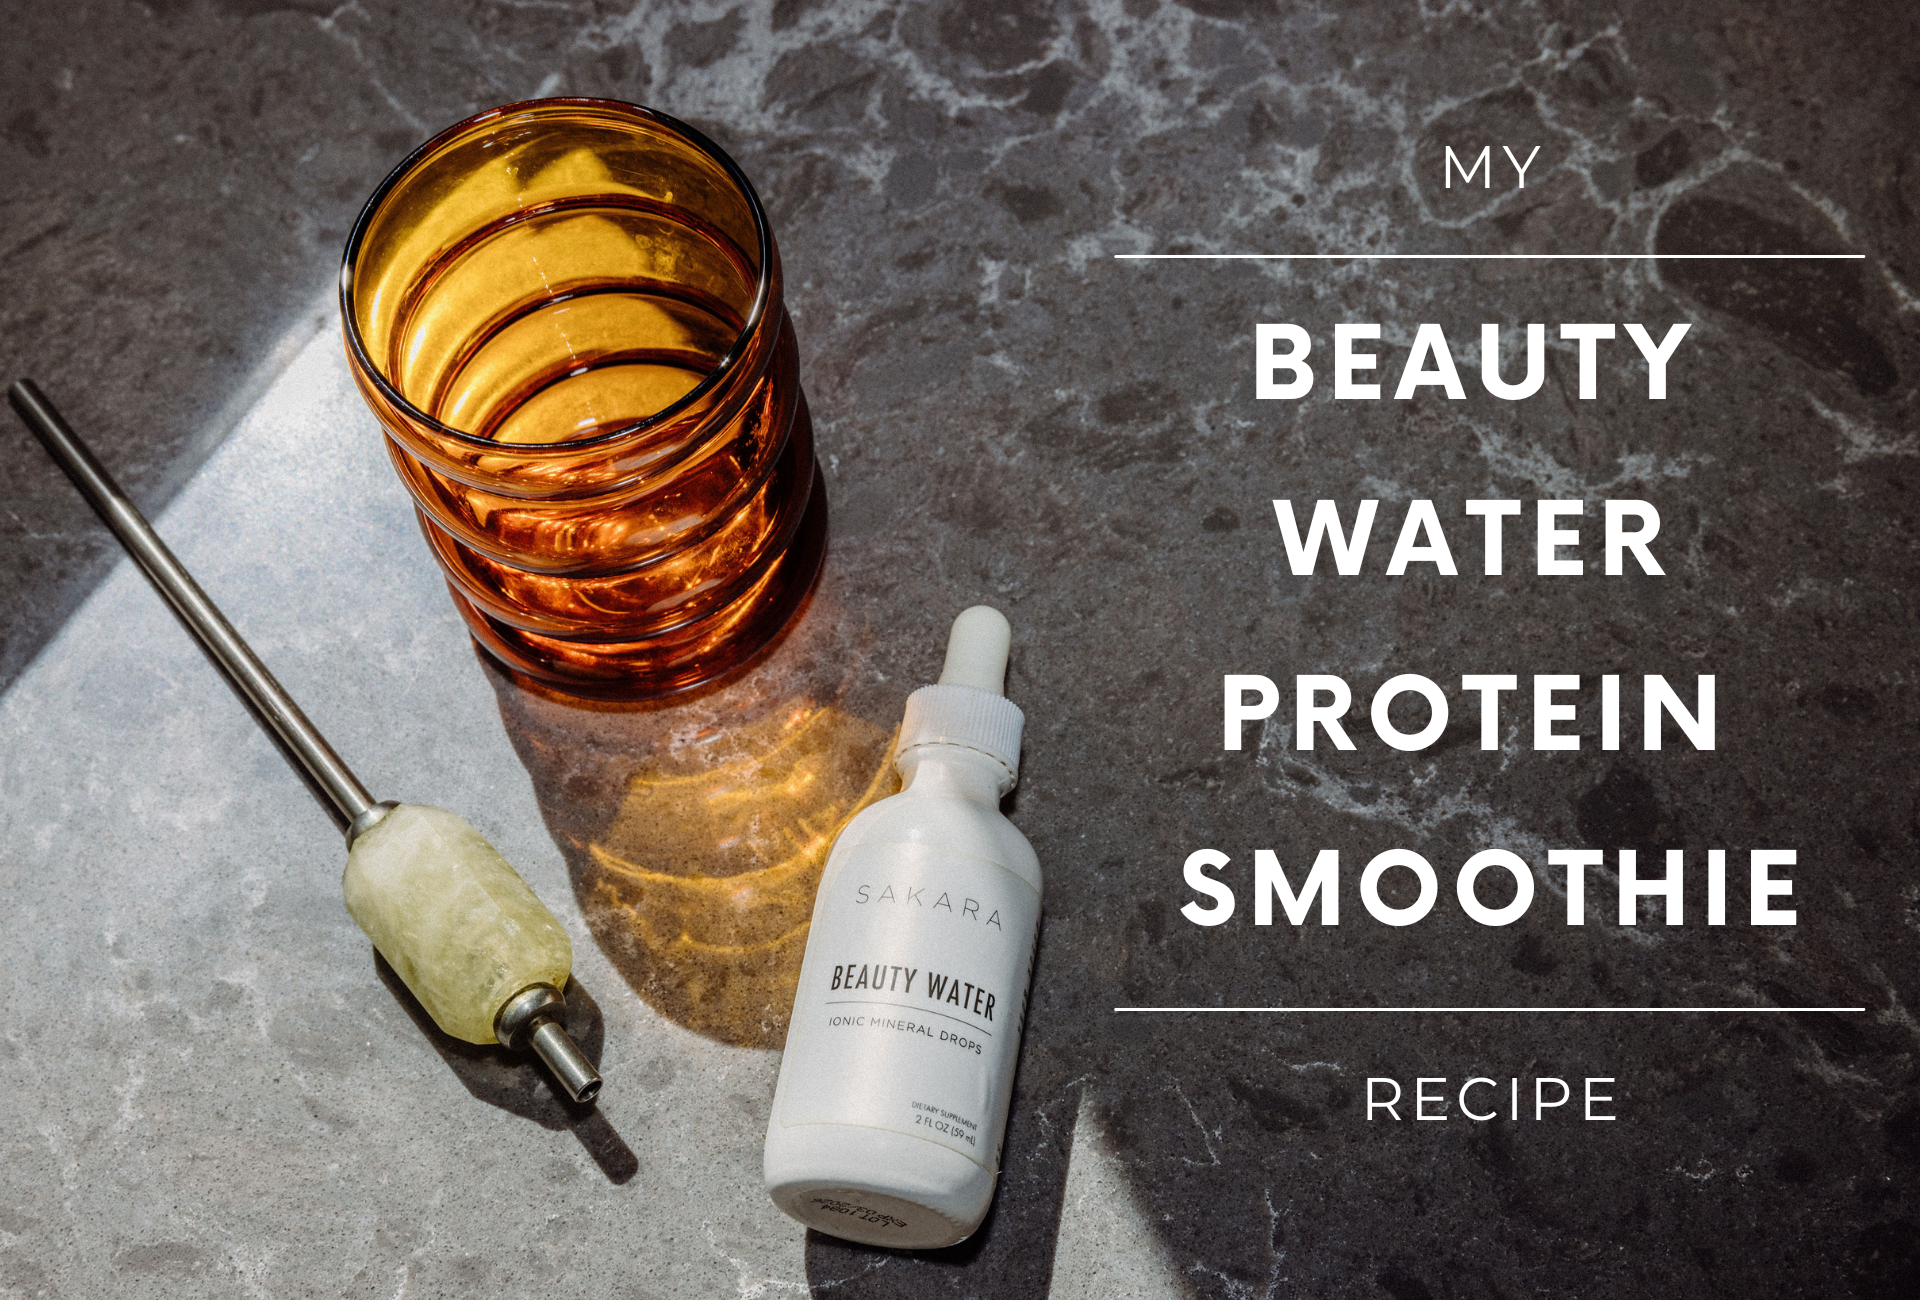 My Beauty Water Protein Smoothie Recipe